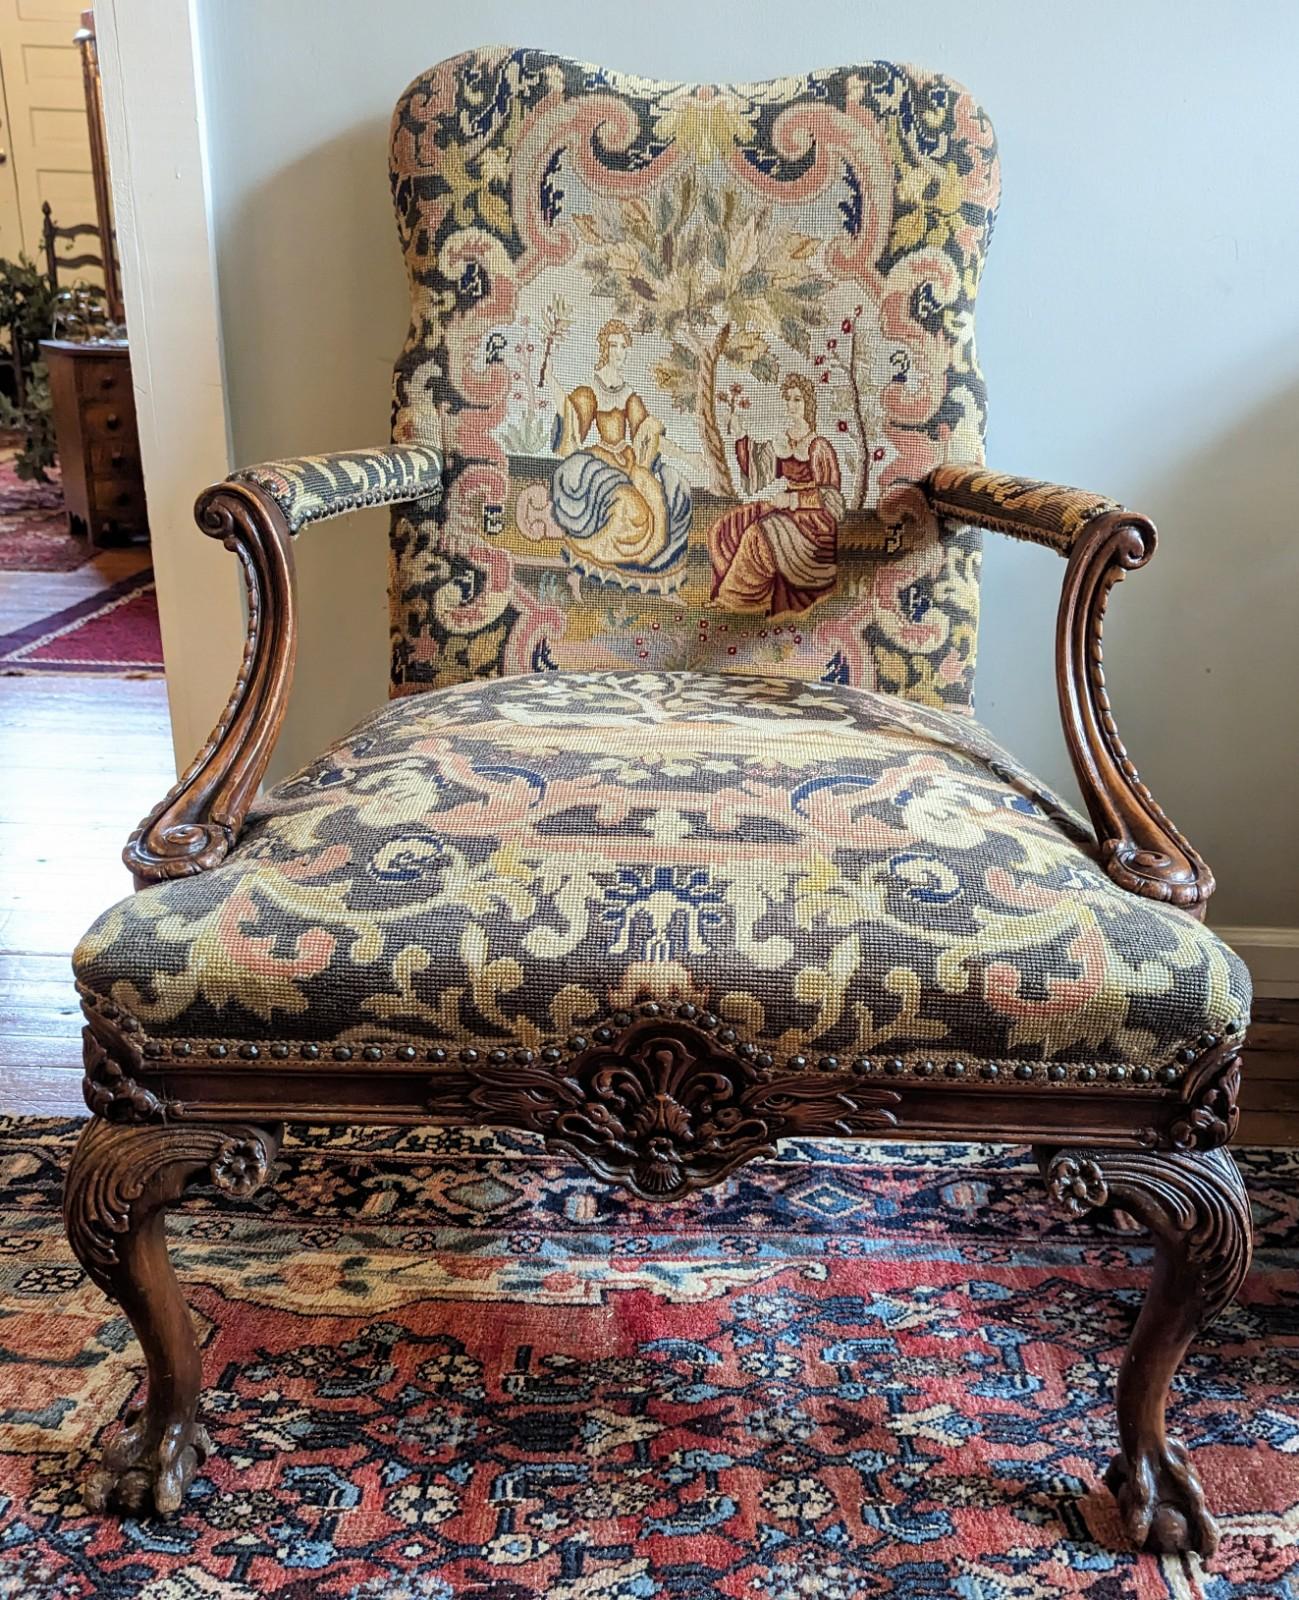 A beautifully carved antique throne or hall chair in the Jacobean style with medieval scenery needlepoint. European circa early 1900's, either French or Italian with a stunning classic design. Features carved wood and brass nail head trim around the